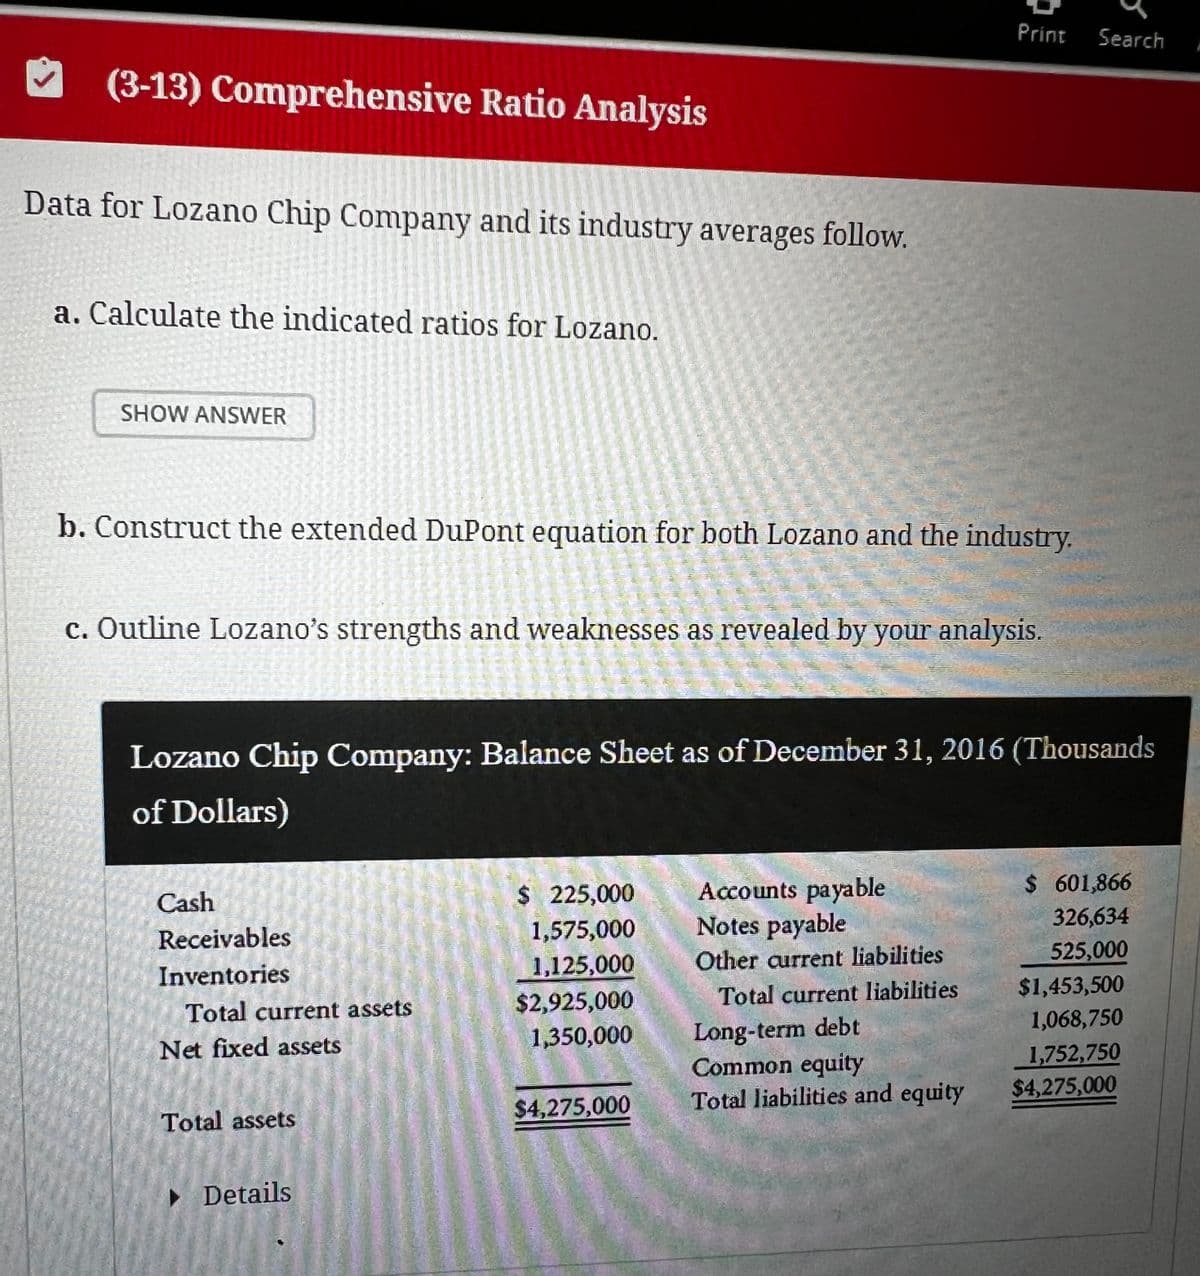 (3-13) Comprehensive Ratio Analysis
Data for Lozano Chip Company and its industry averages follow.
a. Calculate the indicated ratios for Lozano.
SHOW ANSWER
Print
Search
b. Construct the extended DuPont equation for both Lozano and the industry.
c. Outline Lozano's strengths and weaknesses as revealed by your analysis.
Lozano Chip Company: Balance Sheet as of December 31, 2016 (Thousands
of Dollars)
Cash
$ 225,000
Accounts payable
$ 601,866
Receivables
1,575,000
Notes payable
326,634
Inventories
1,125,000
Other current liabilities
525,000
Total current assets
$2,925,000
Total current liabilities
$1,453,500
Net fixed assets
1,350,000
Long-term debt
1,068,750
Common equity
1,752,750
Total assets
$4,275,000
Total liabilities and equity
$4,275,000
▸ Details